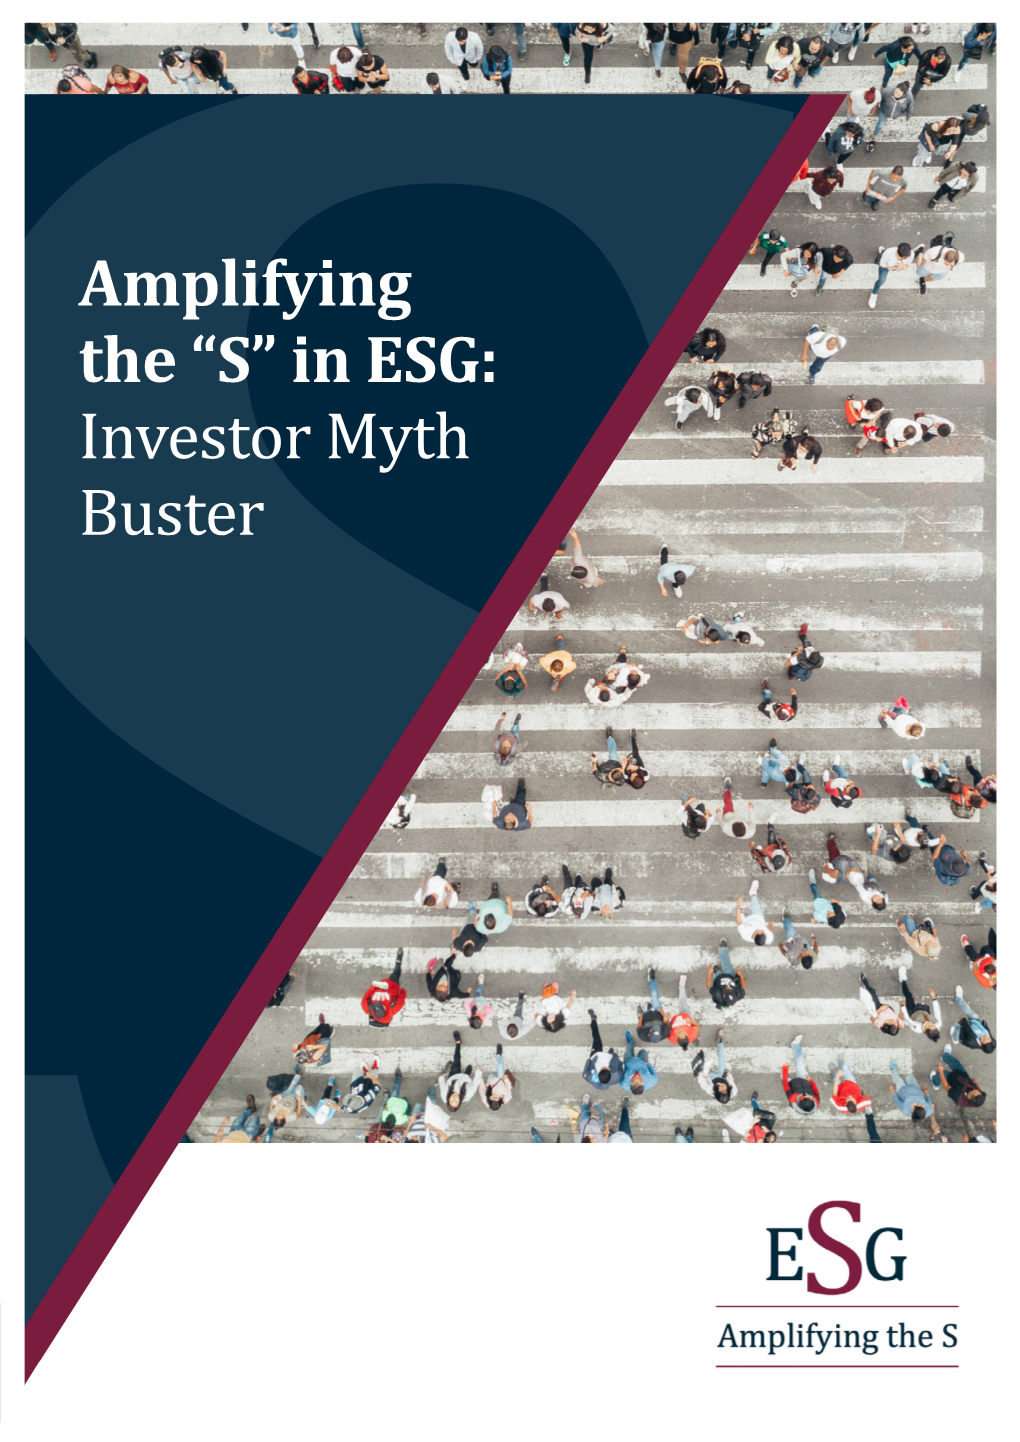 In ESG: Investor Myth Buster Table of Contents